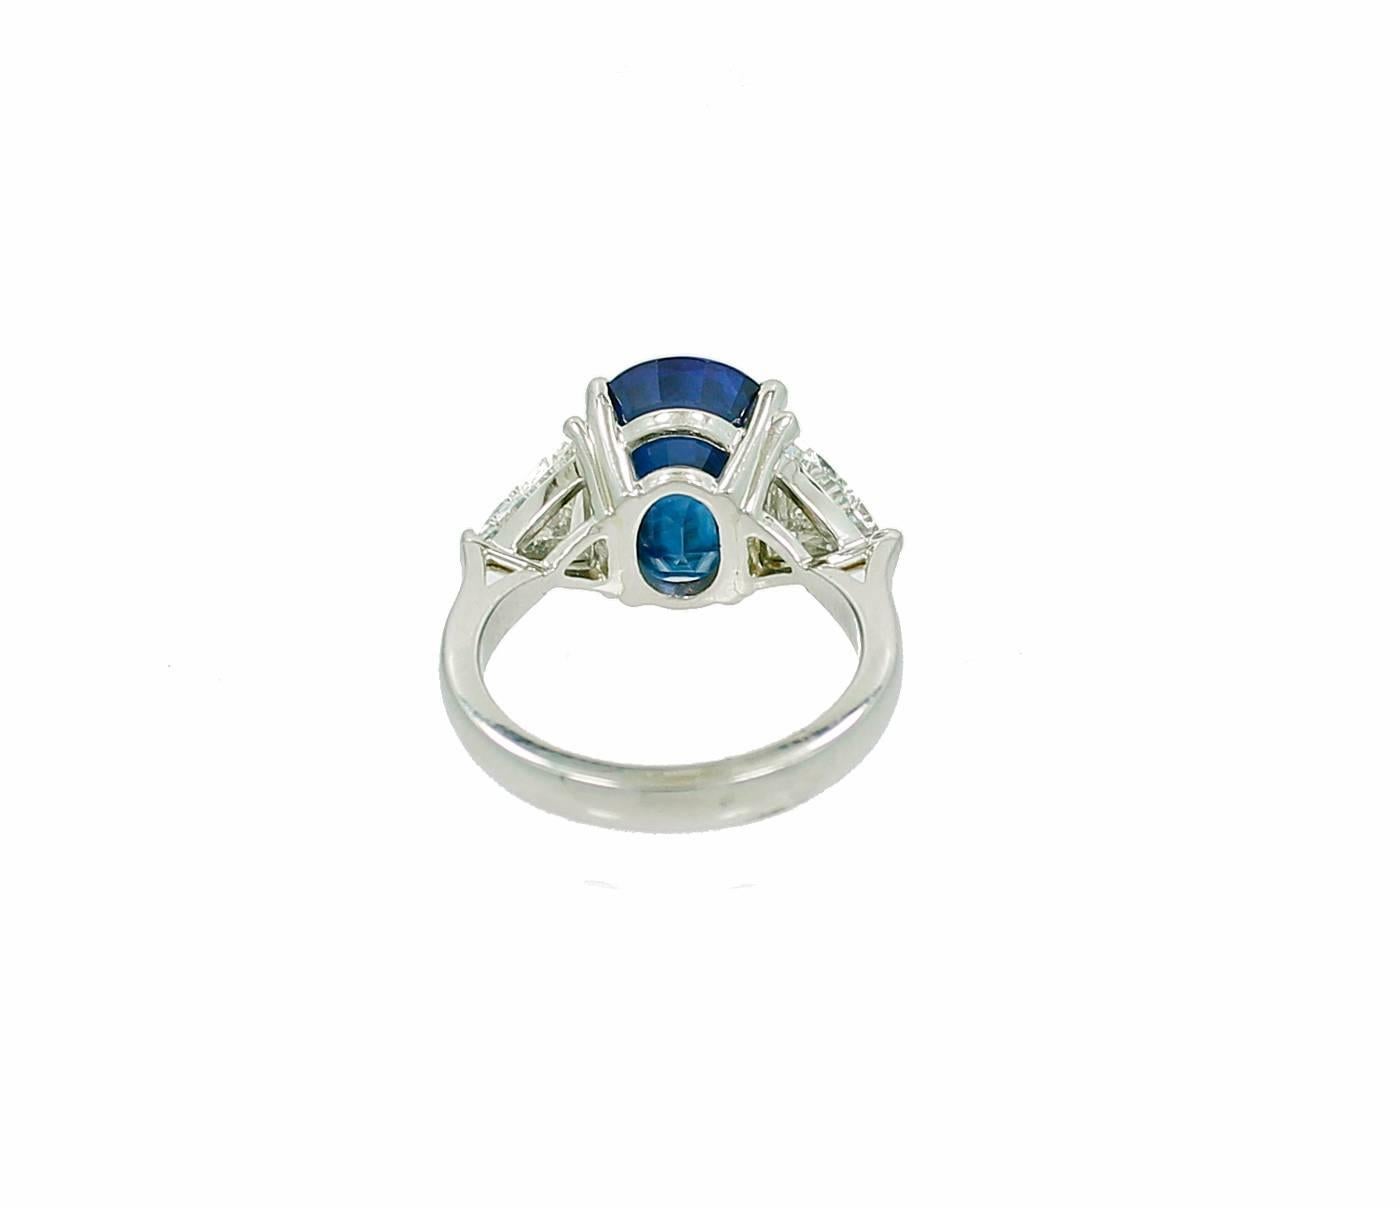 Platinum Ring with a Center Ceylon Sapphire weighing 7.08ct and two trillion Cut Diamonds weighing a total of 1.61ct I Color VS Clarity. This ring is a size 6.5 and can be sized up or down upon request. 